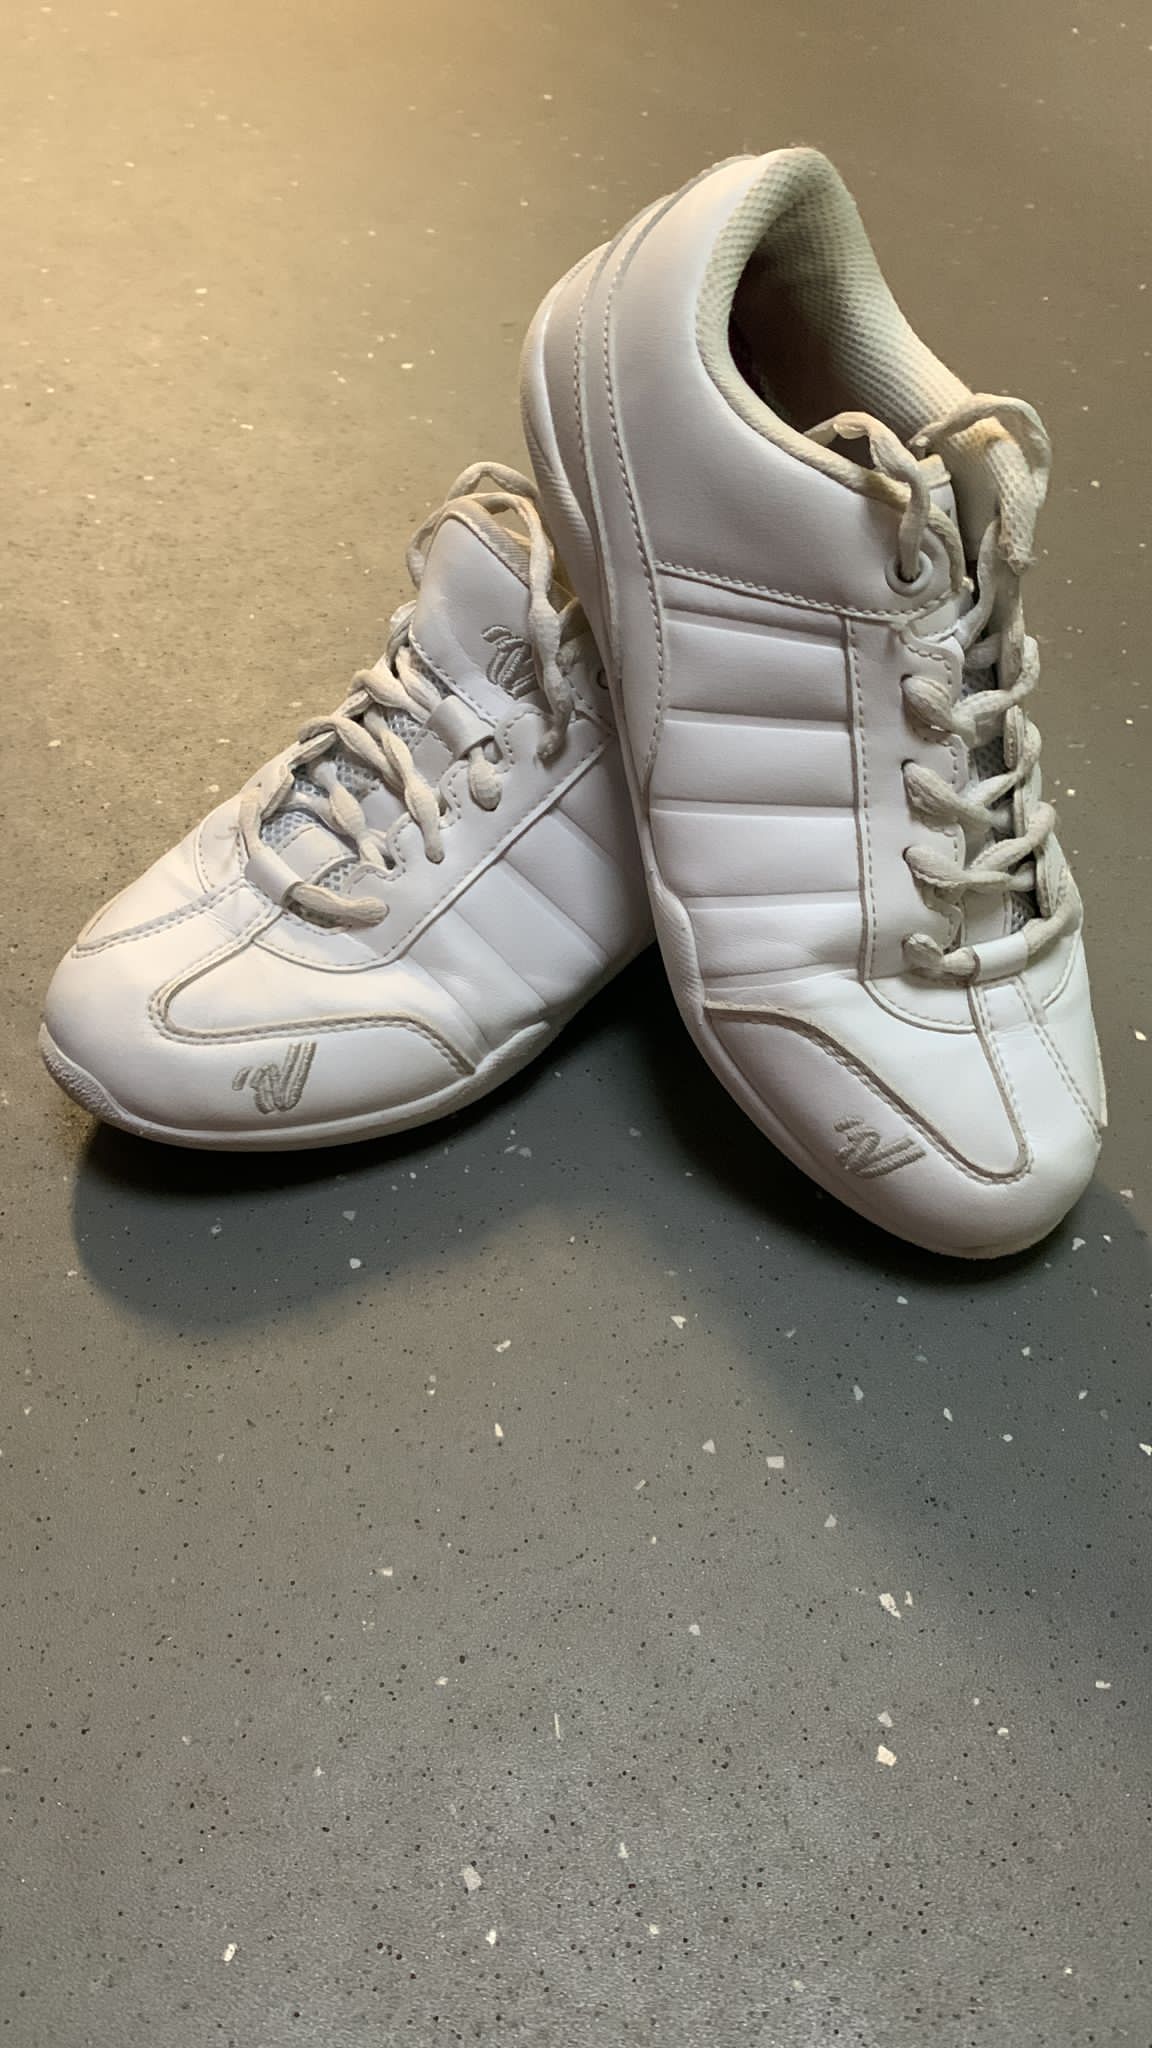 Cheer Shoes - Size UK 4